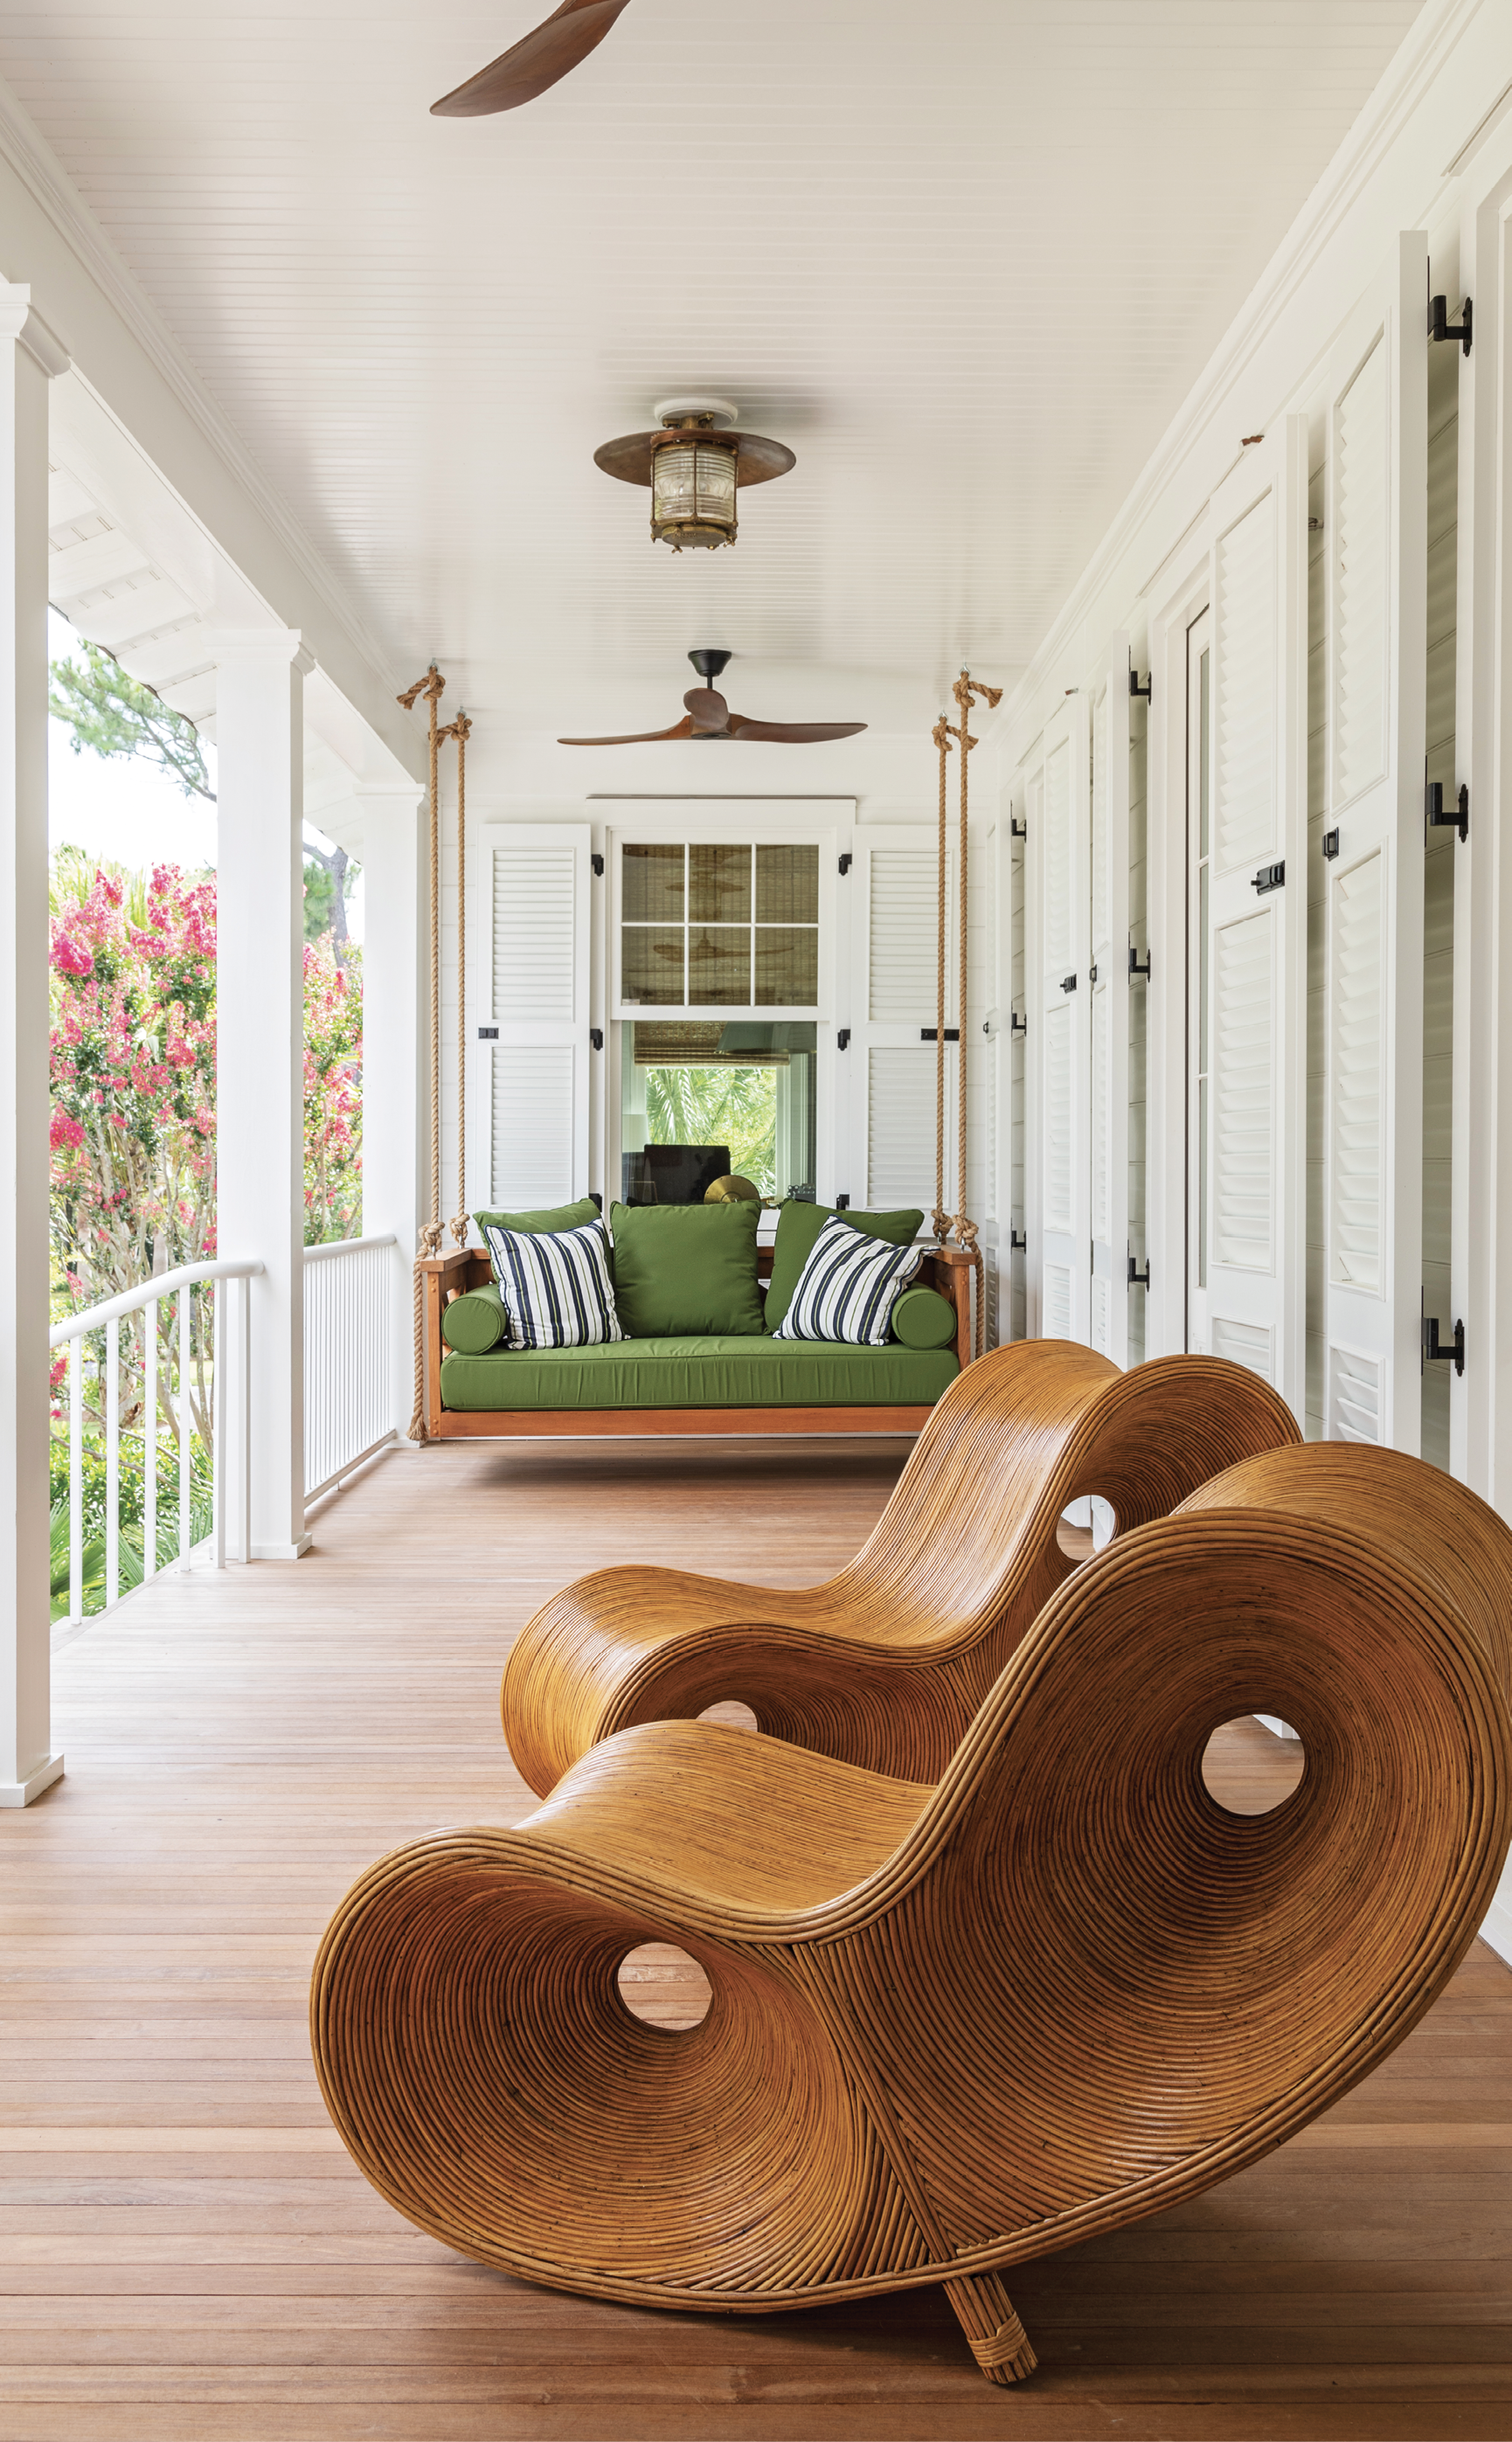 A swing is a must for a Lowcountry porch, and this one, covered in Sunbrella “Palm” canvas at the front entrance hints to the green and blue hues inside. The Rattan Infinity Loungers from Fritz Porter add a playful, artistic touch and the repurposed nautical light fixture brings in the vintage vibe.